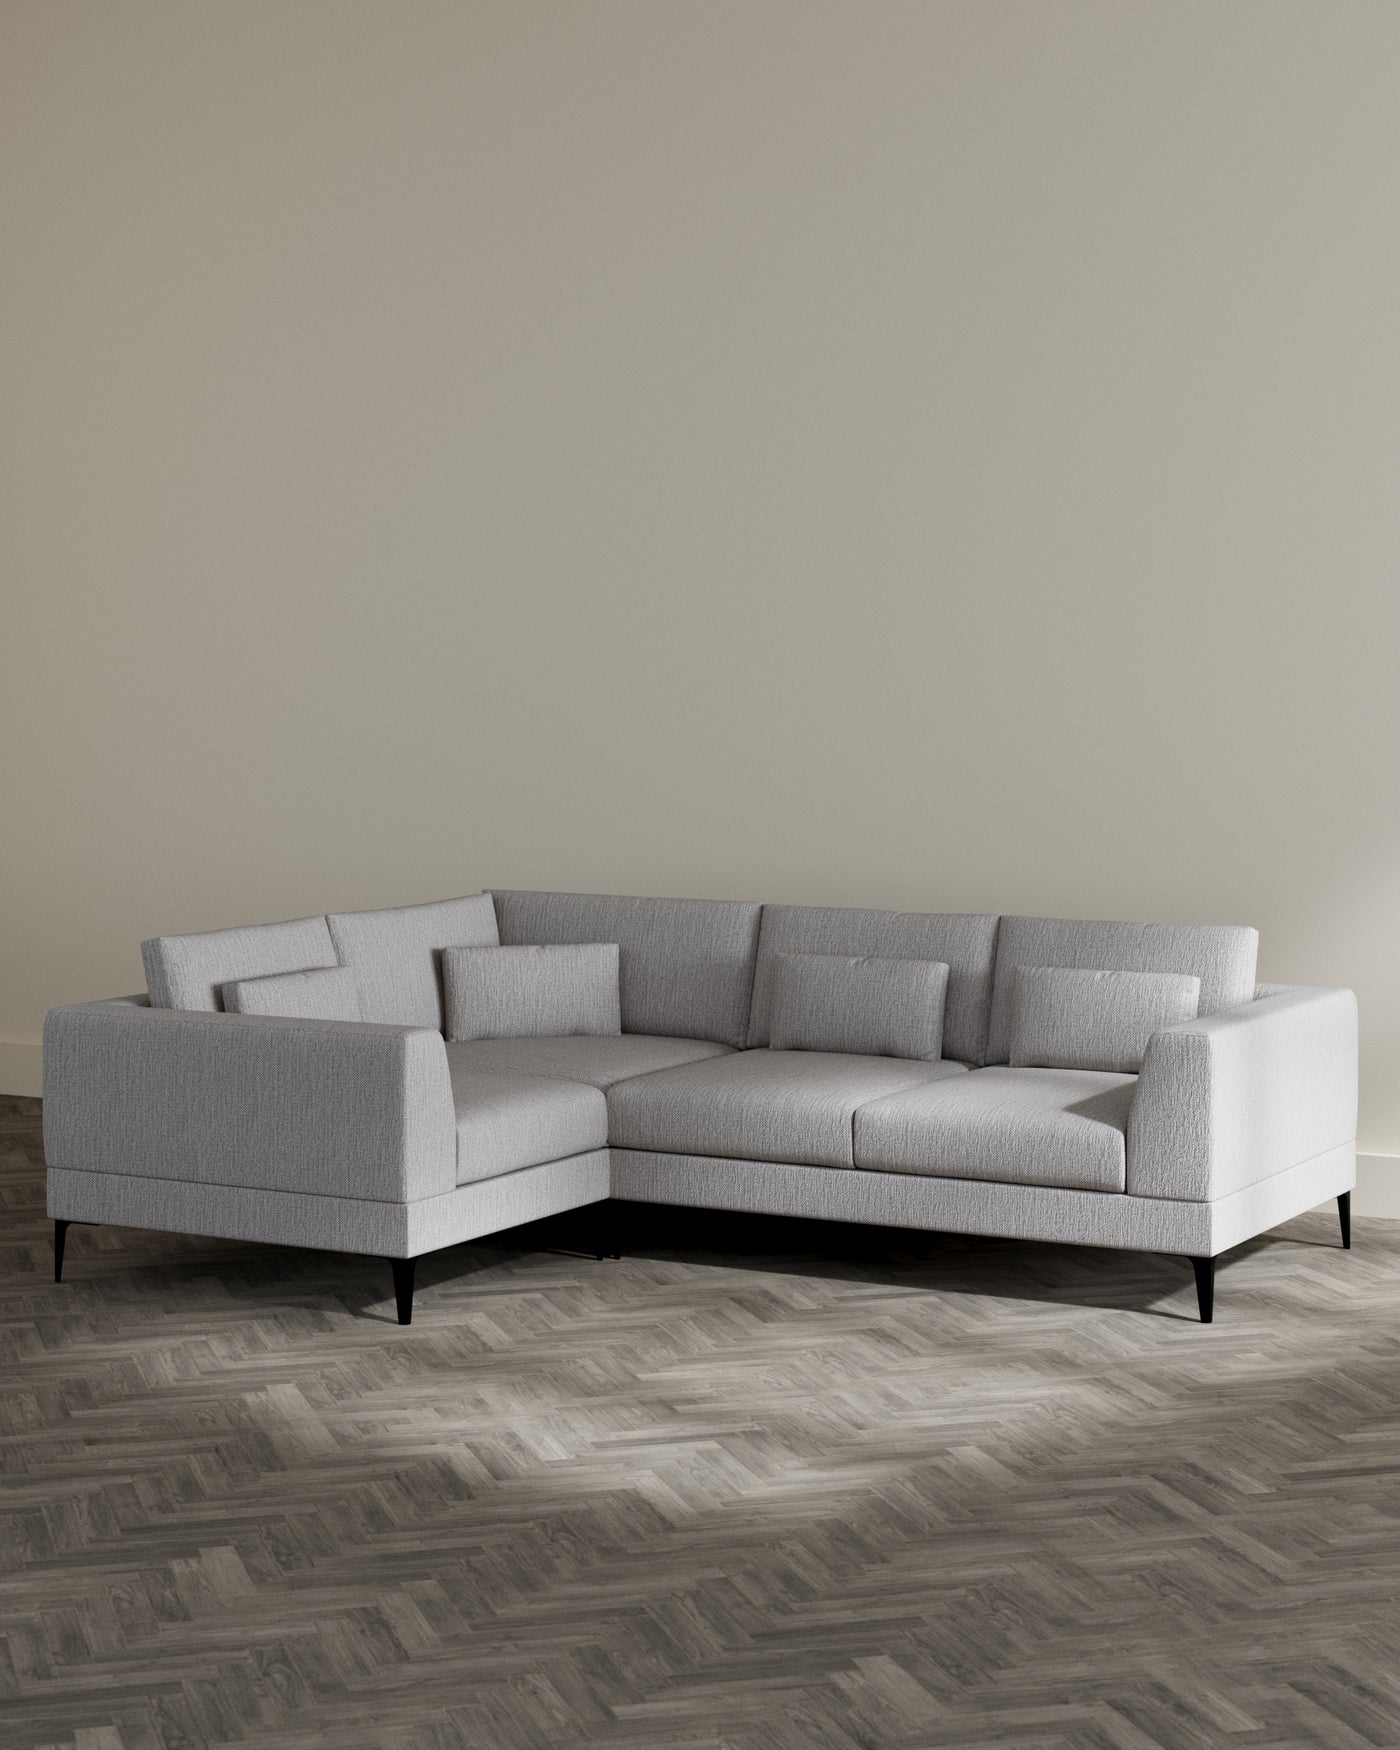 L-shaped sectional sofa with a textured light grey fabric upholstery and tapered dark wooden legs, featuring a contemporary design with clean lines and multiple cushioned seats and backrests for comfortable seating.